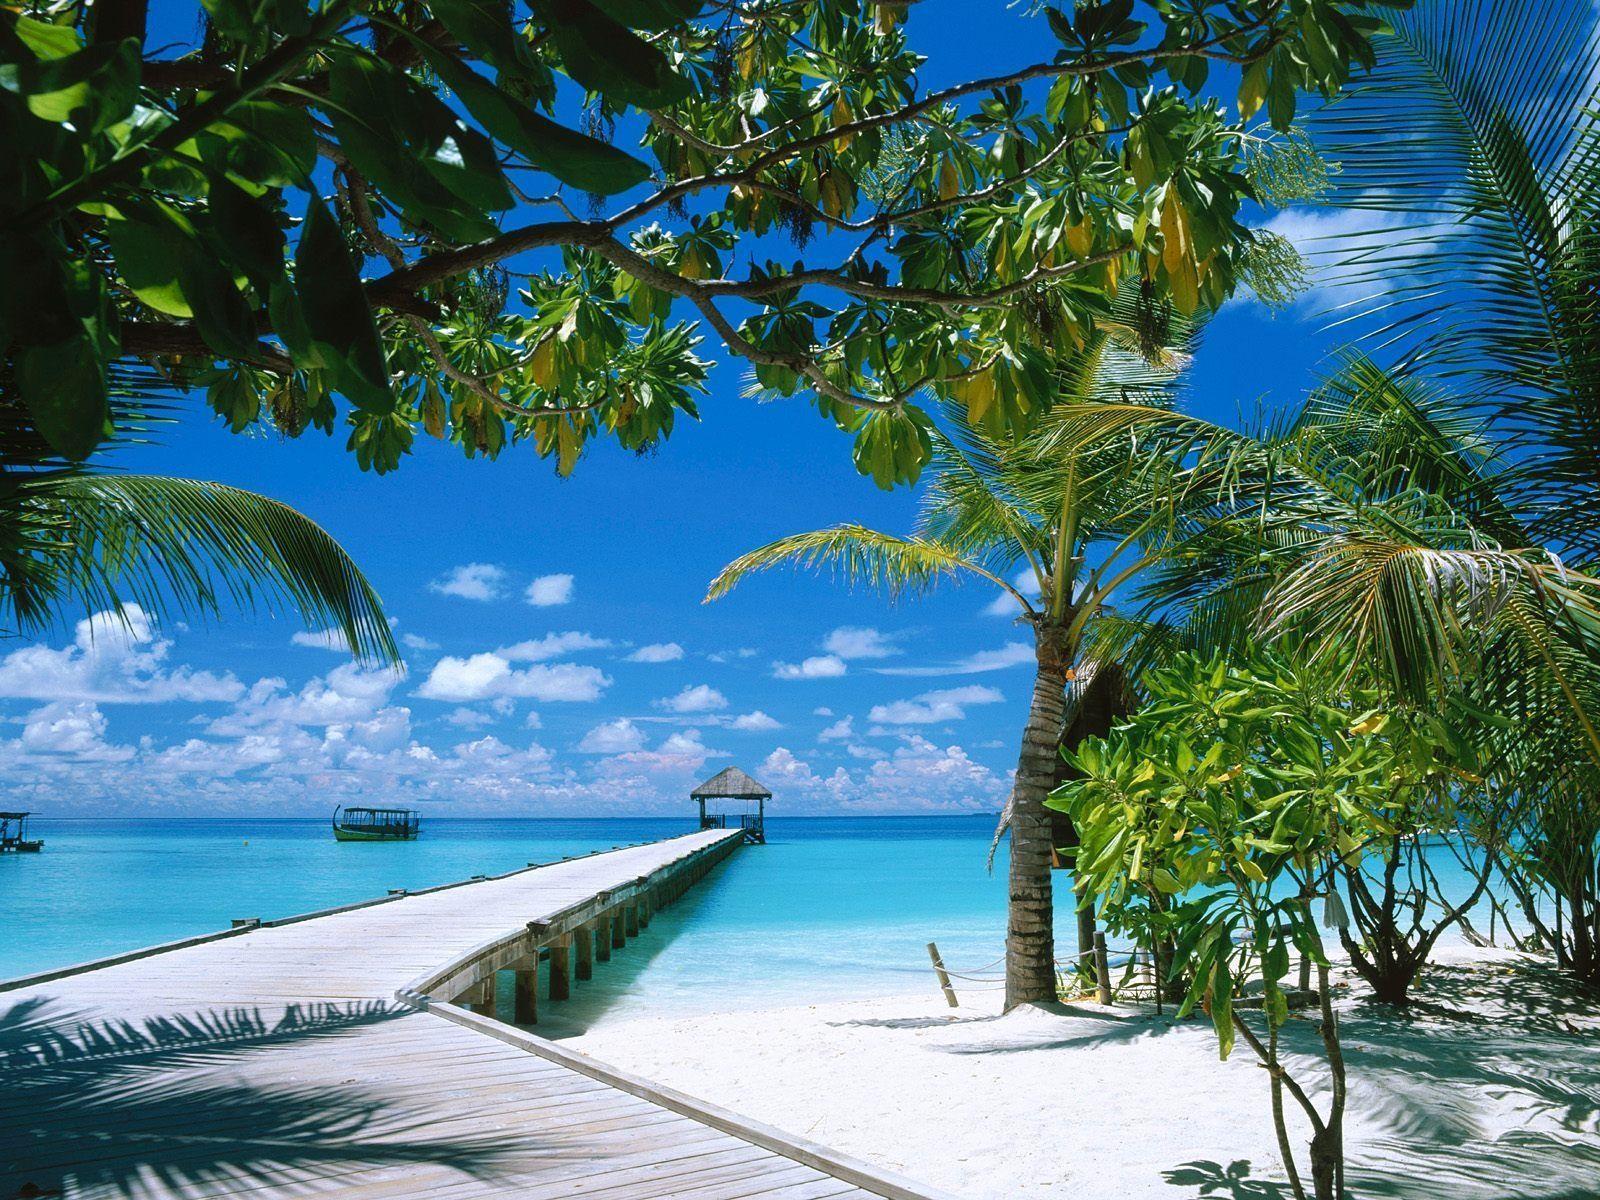 Beautiful Beaches Wallpapers Hd Pictures 4 HD Wallpapers